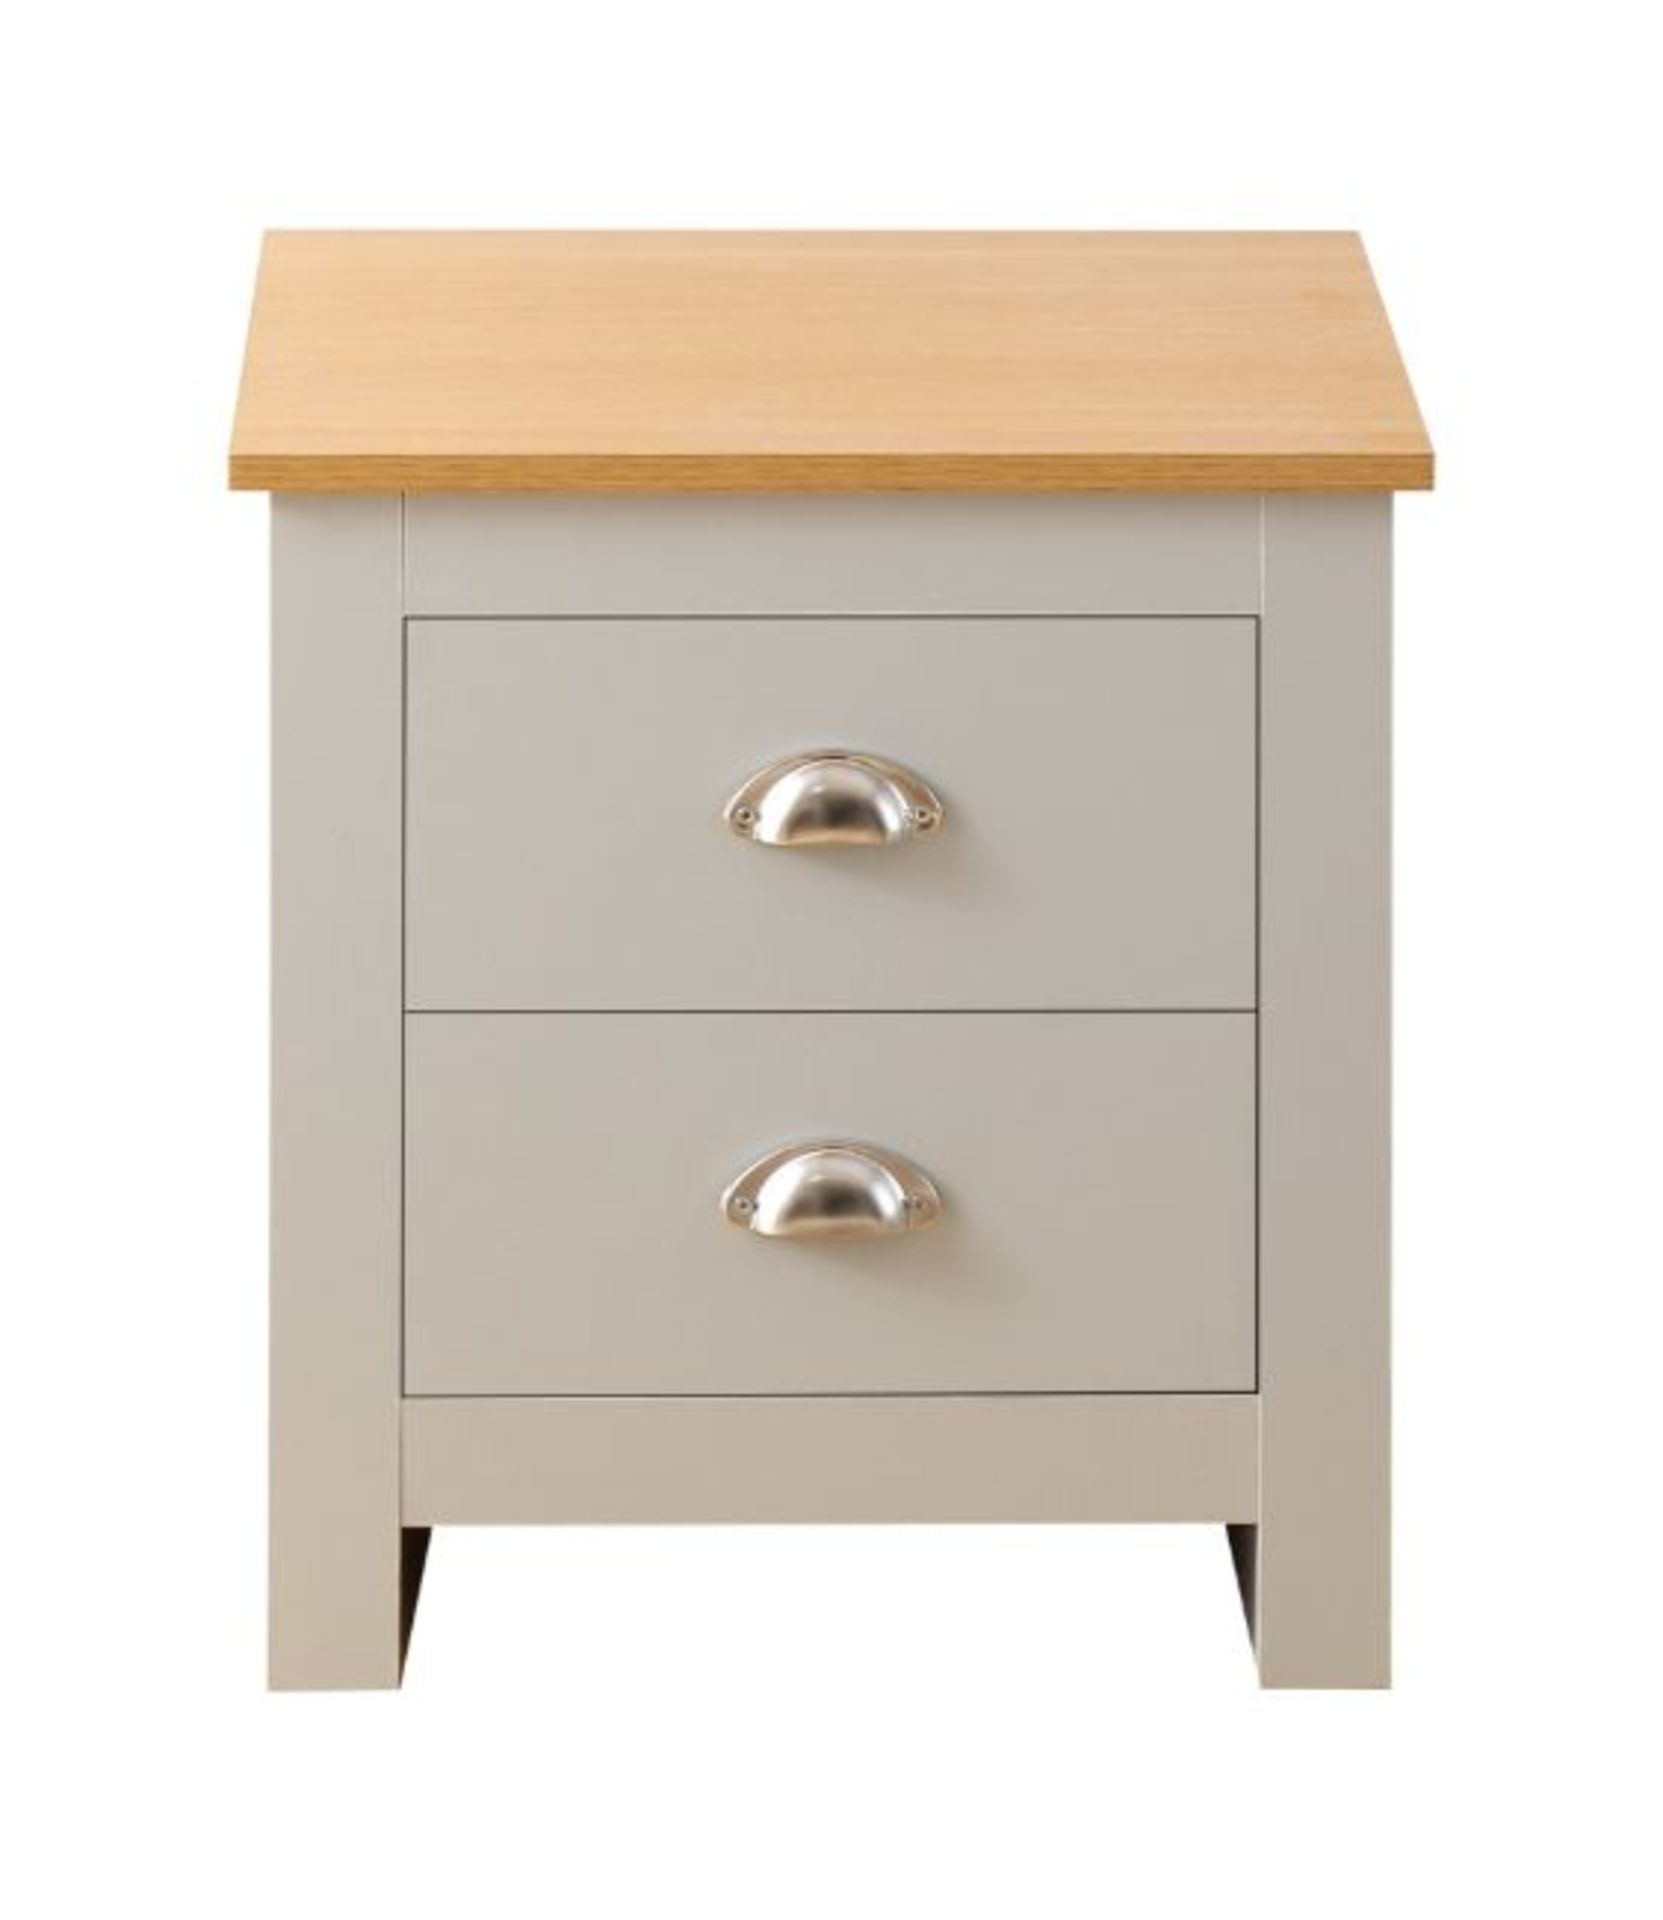 10 X BRAND NEW FLAT PACKED GREY WITH OAK TOP SHAKER-INSPIRED STYLISH DESIGN BEDSIDES - Image 2 of 4